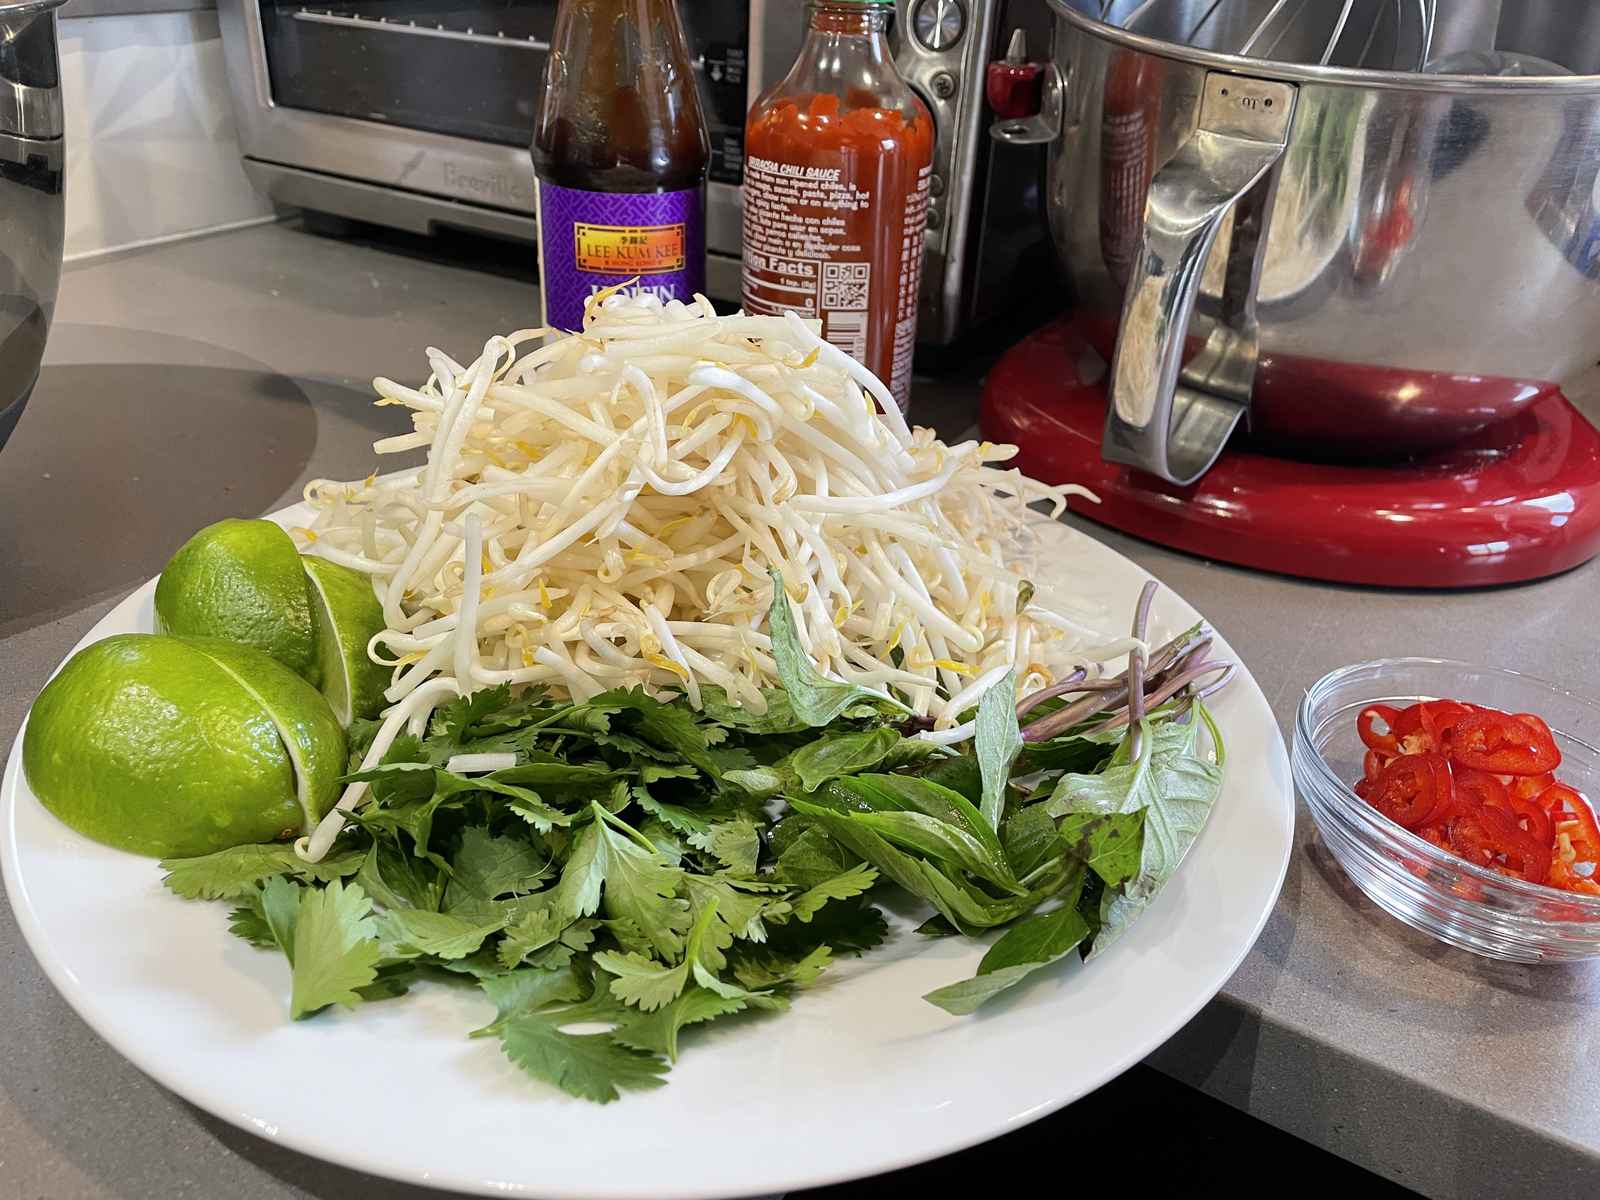 A pile of bean sprouts, basil, cilantro and limes along with hosin and sriracha